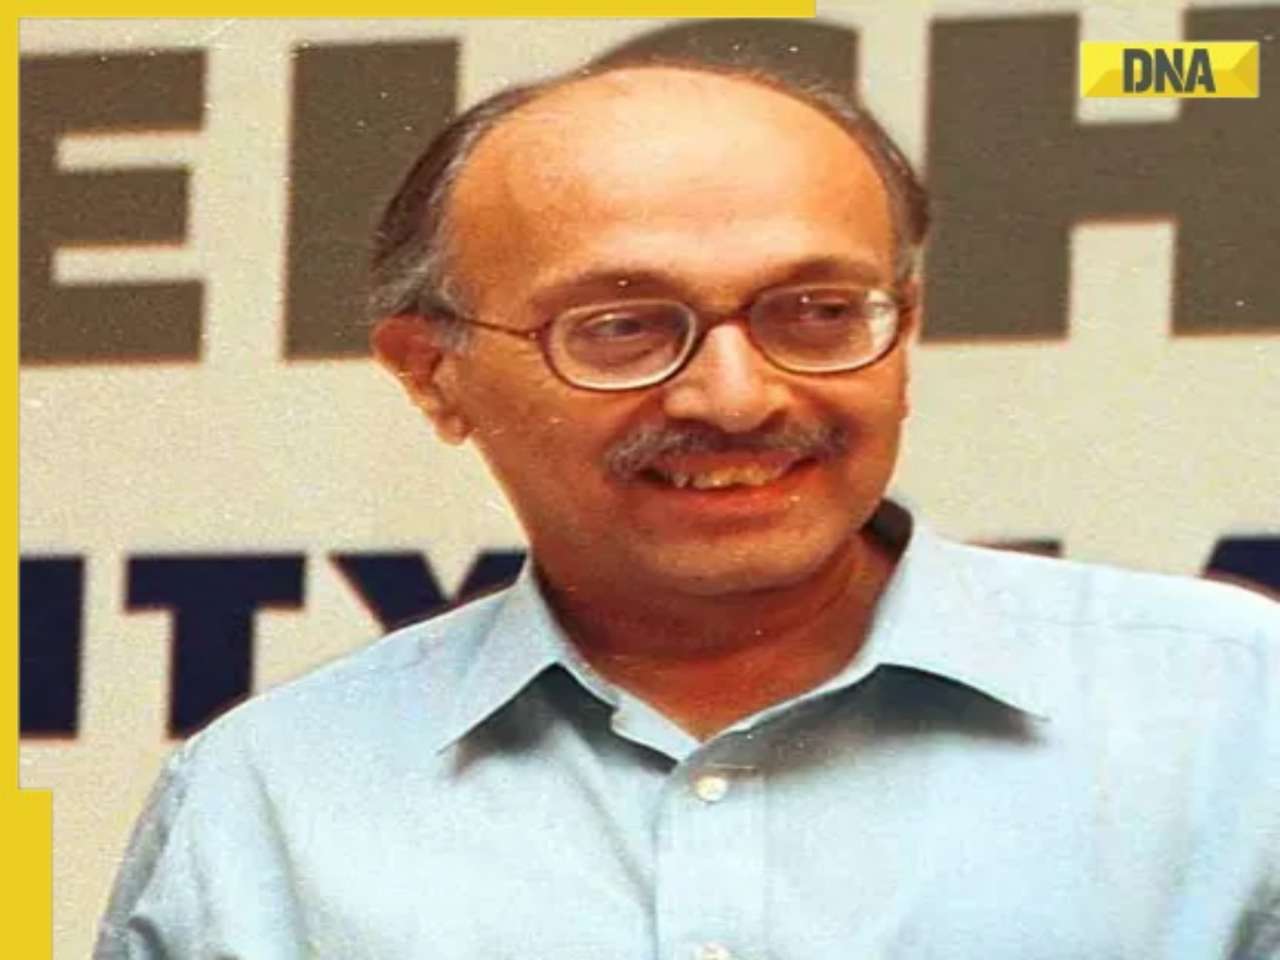 Meet one of India’s richest man who owns Rs 100000 crore company, sells one of world’s oldest products, net worth is...